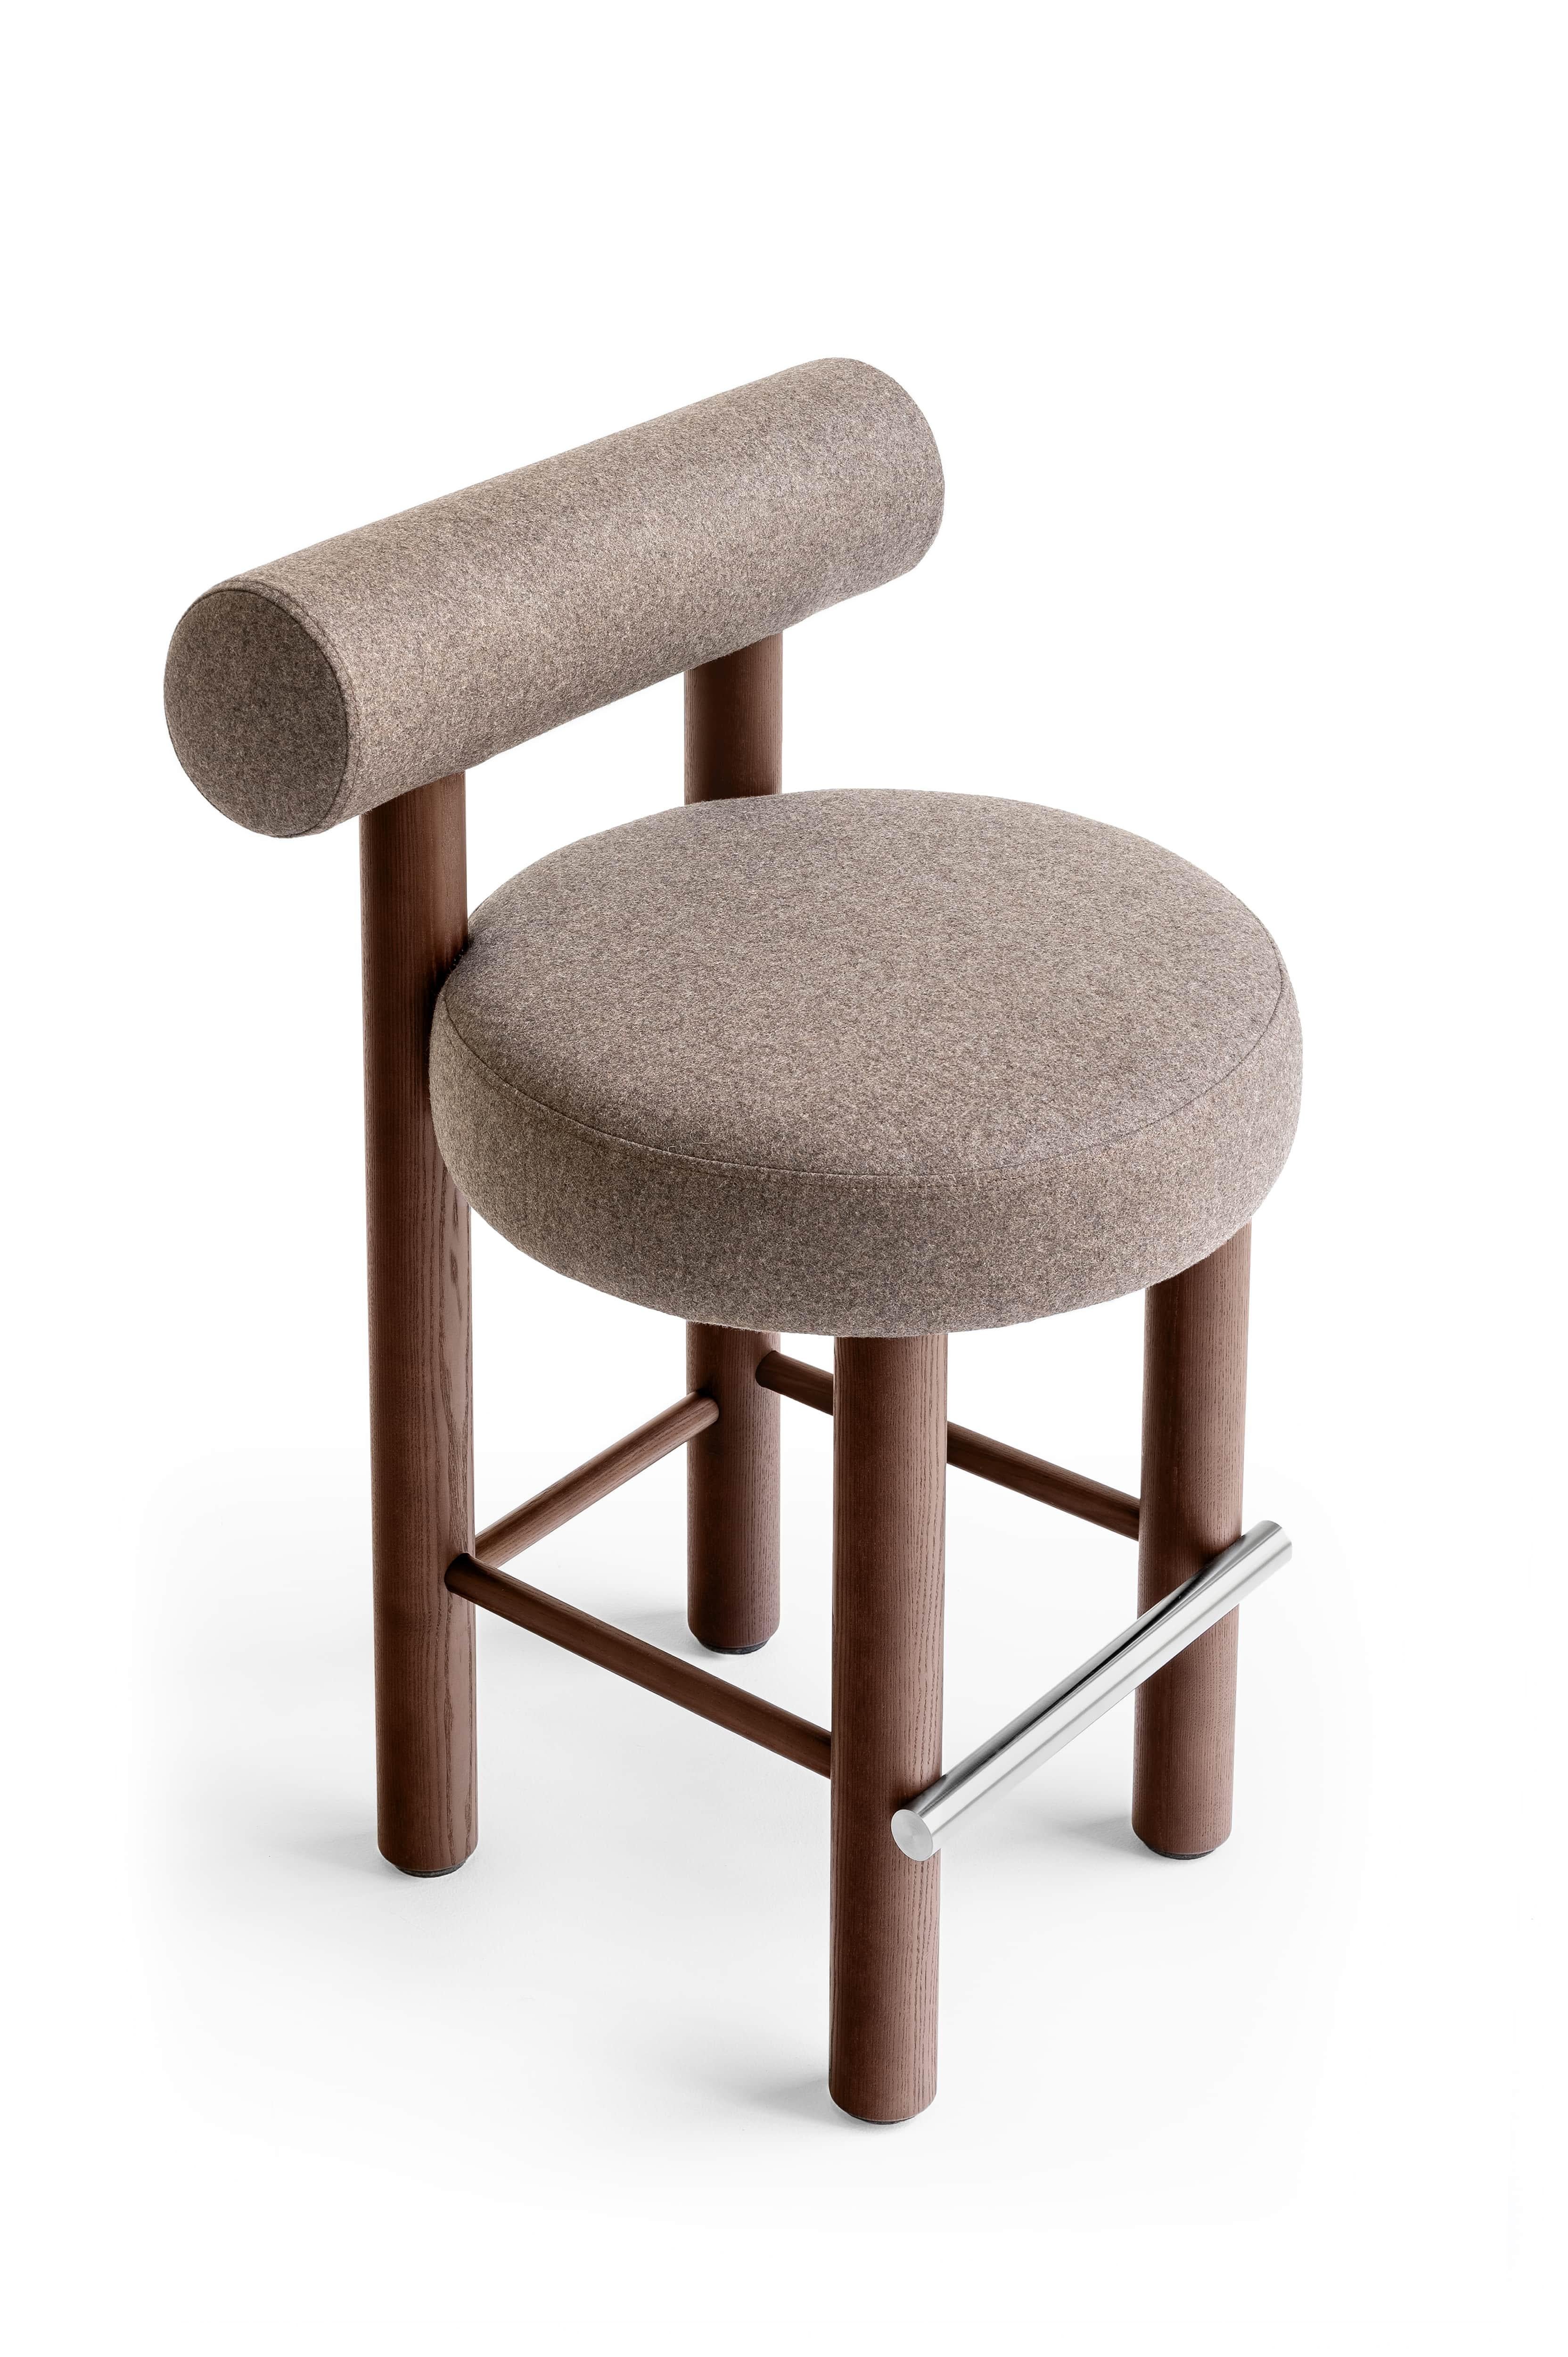 Modern Counter Chair Gropius CS2/65 in Wool Fabric with Wooden Legs by Noom 13